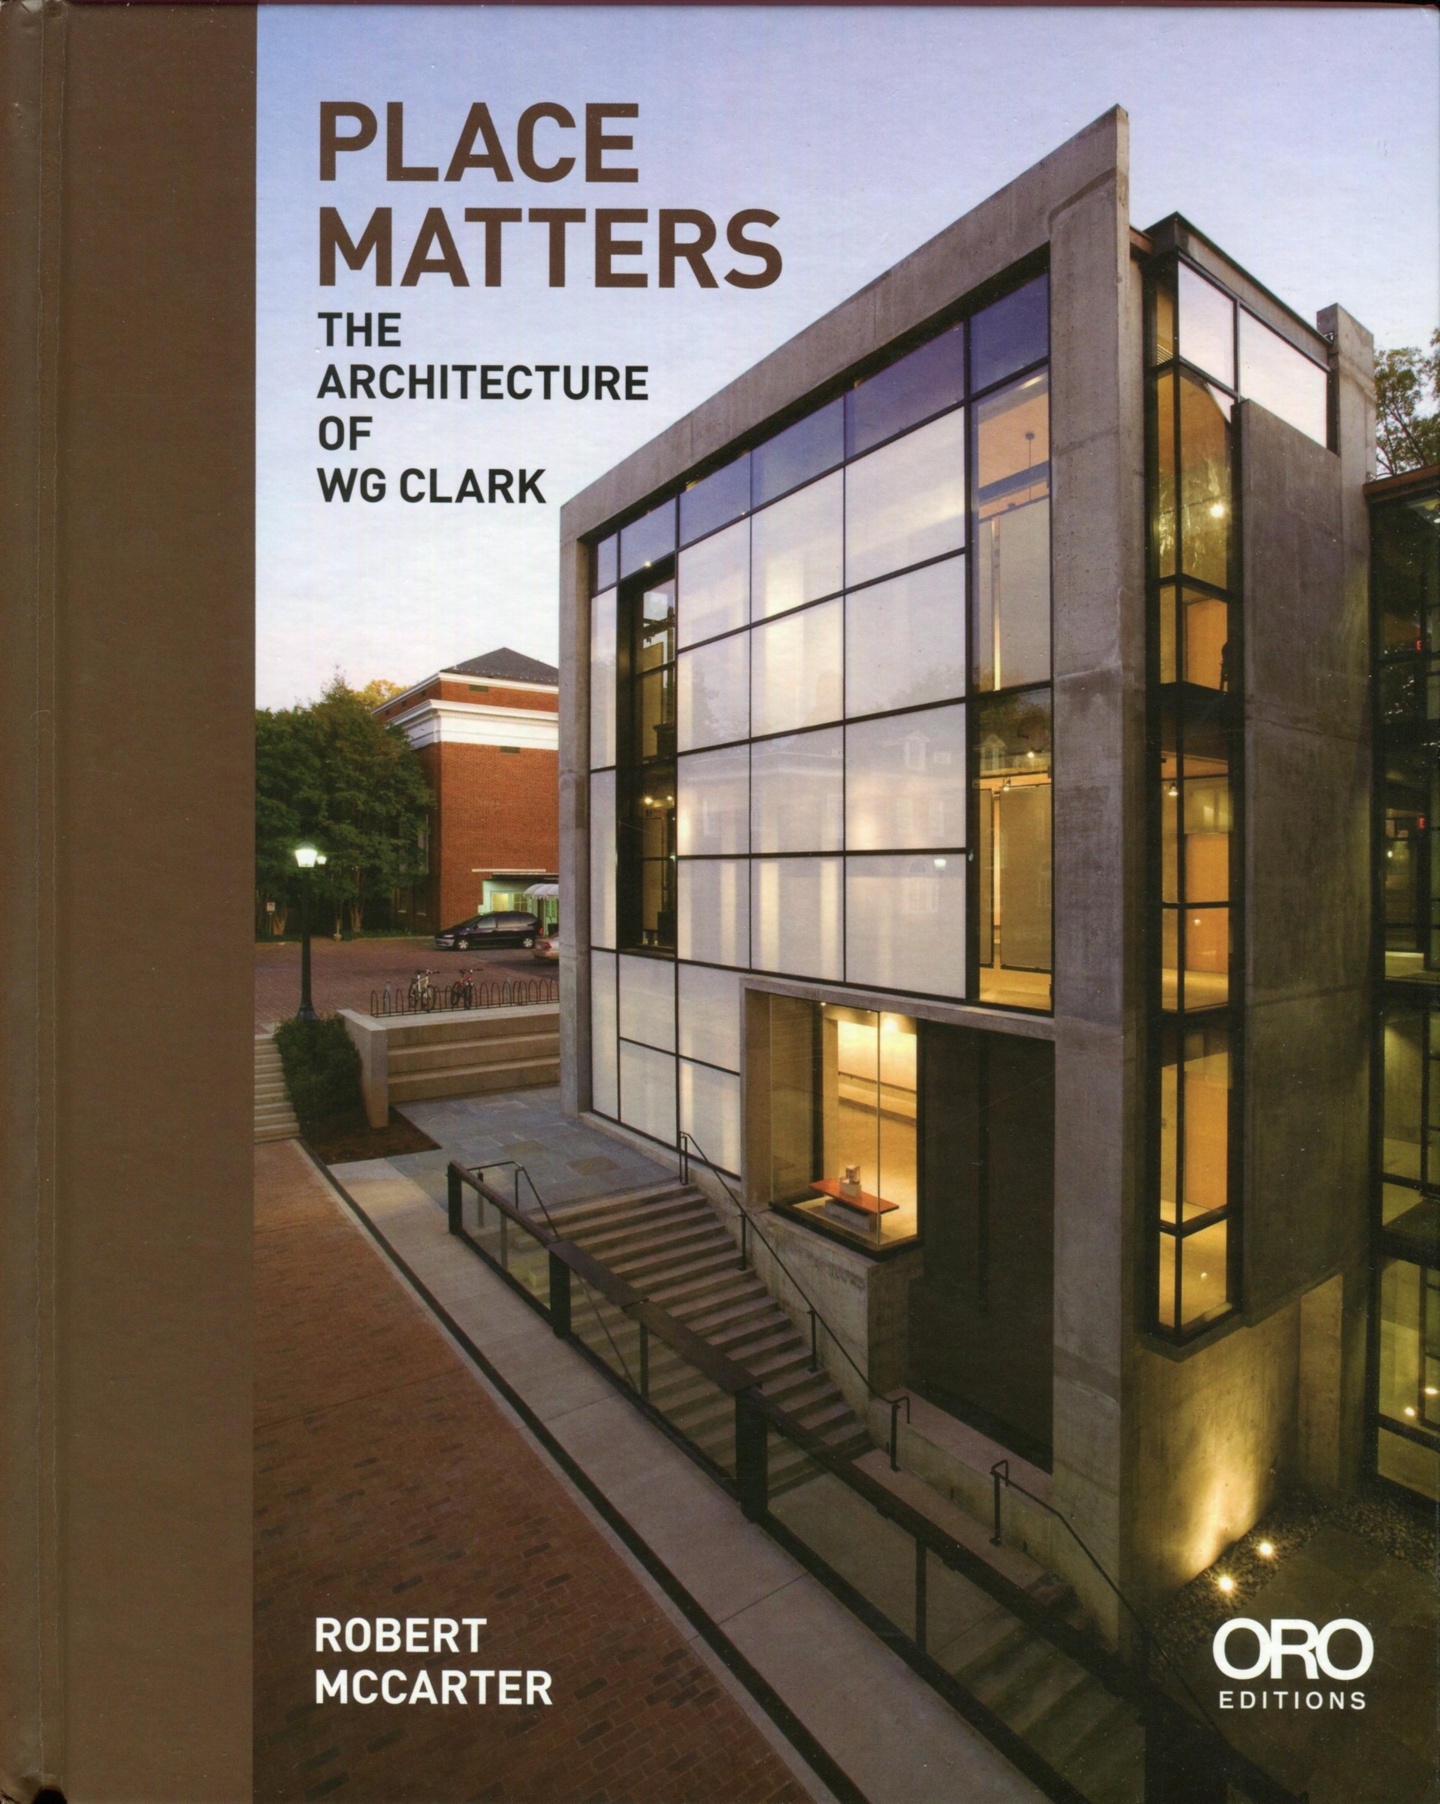 Cover of Place Matters, featuring a contemporary, multistory glass-and-stone building by WG Clark